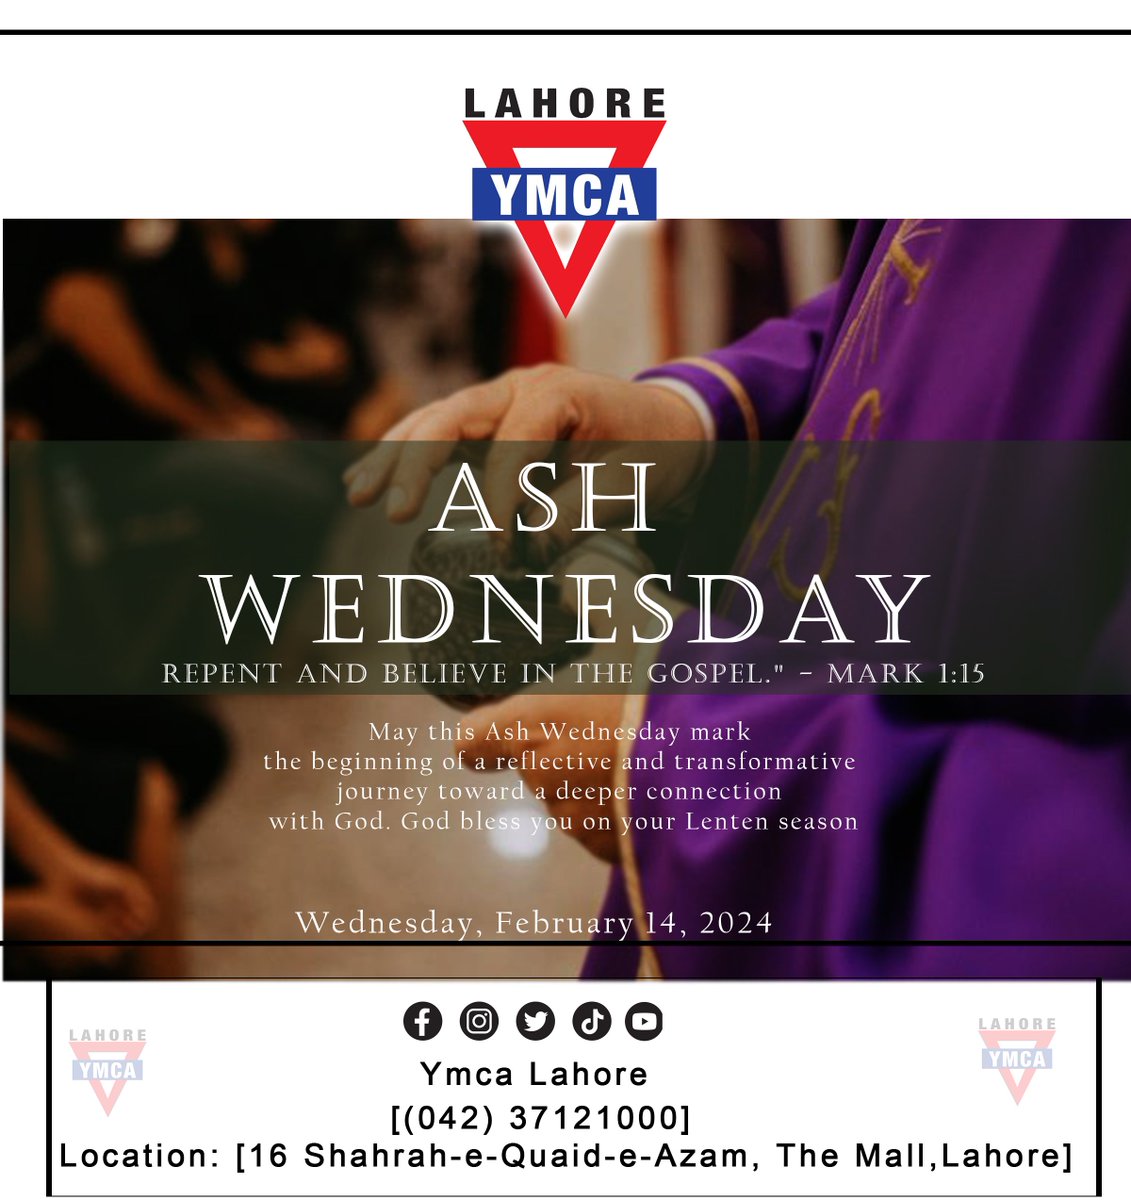 Ash Wednesday Observance: Meaning, Traditions, and Significance
#YMCA #ymcalahore 
#AshWednesday #Lent #Christianity #Observance #Penitence #Rituals #Catholicism #Faith #Prayer #Reflection #Spirituality #Church #traditionalcuisine